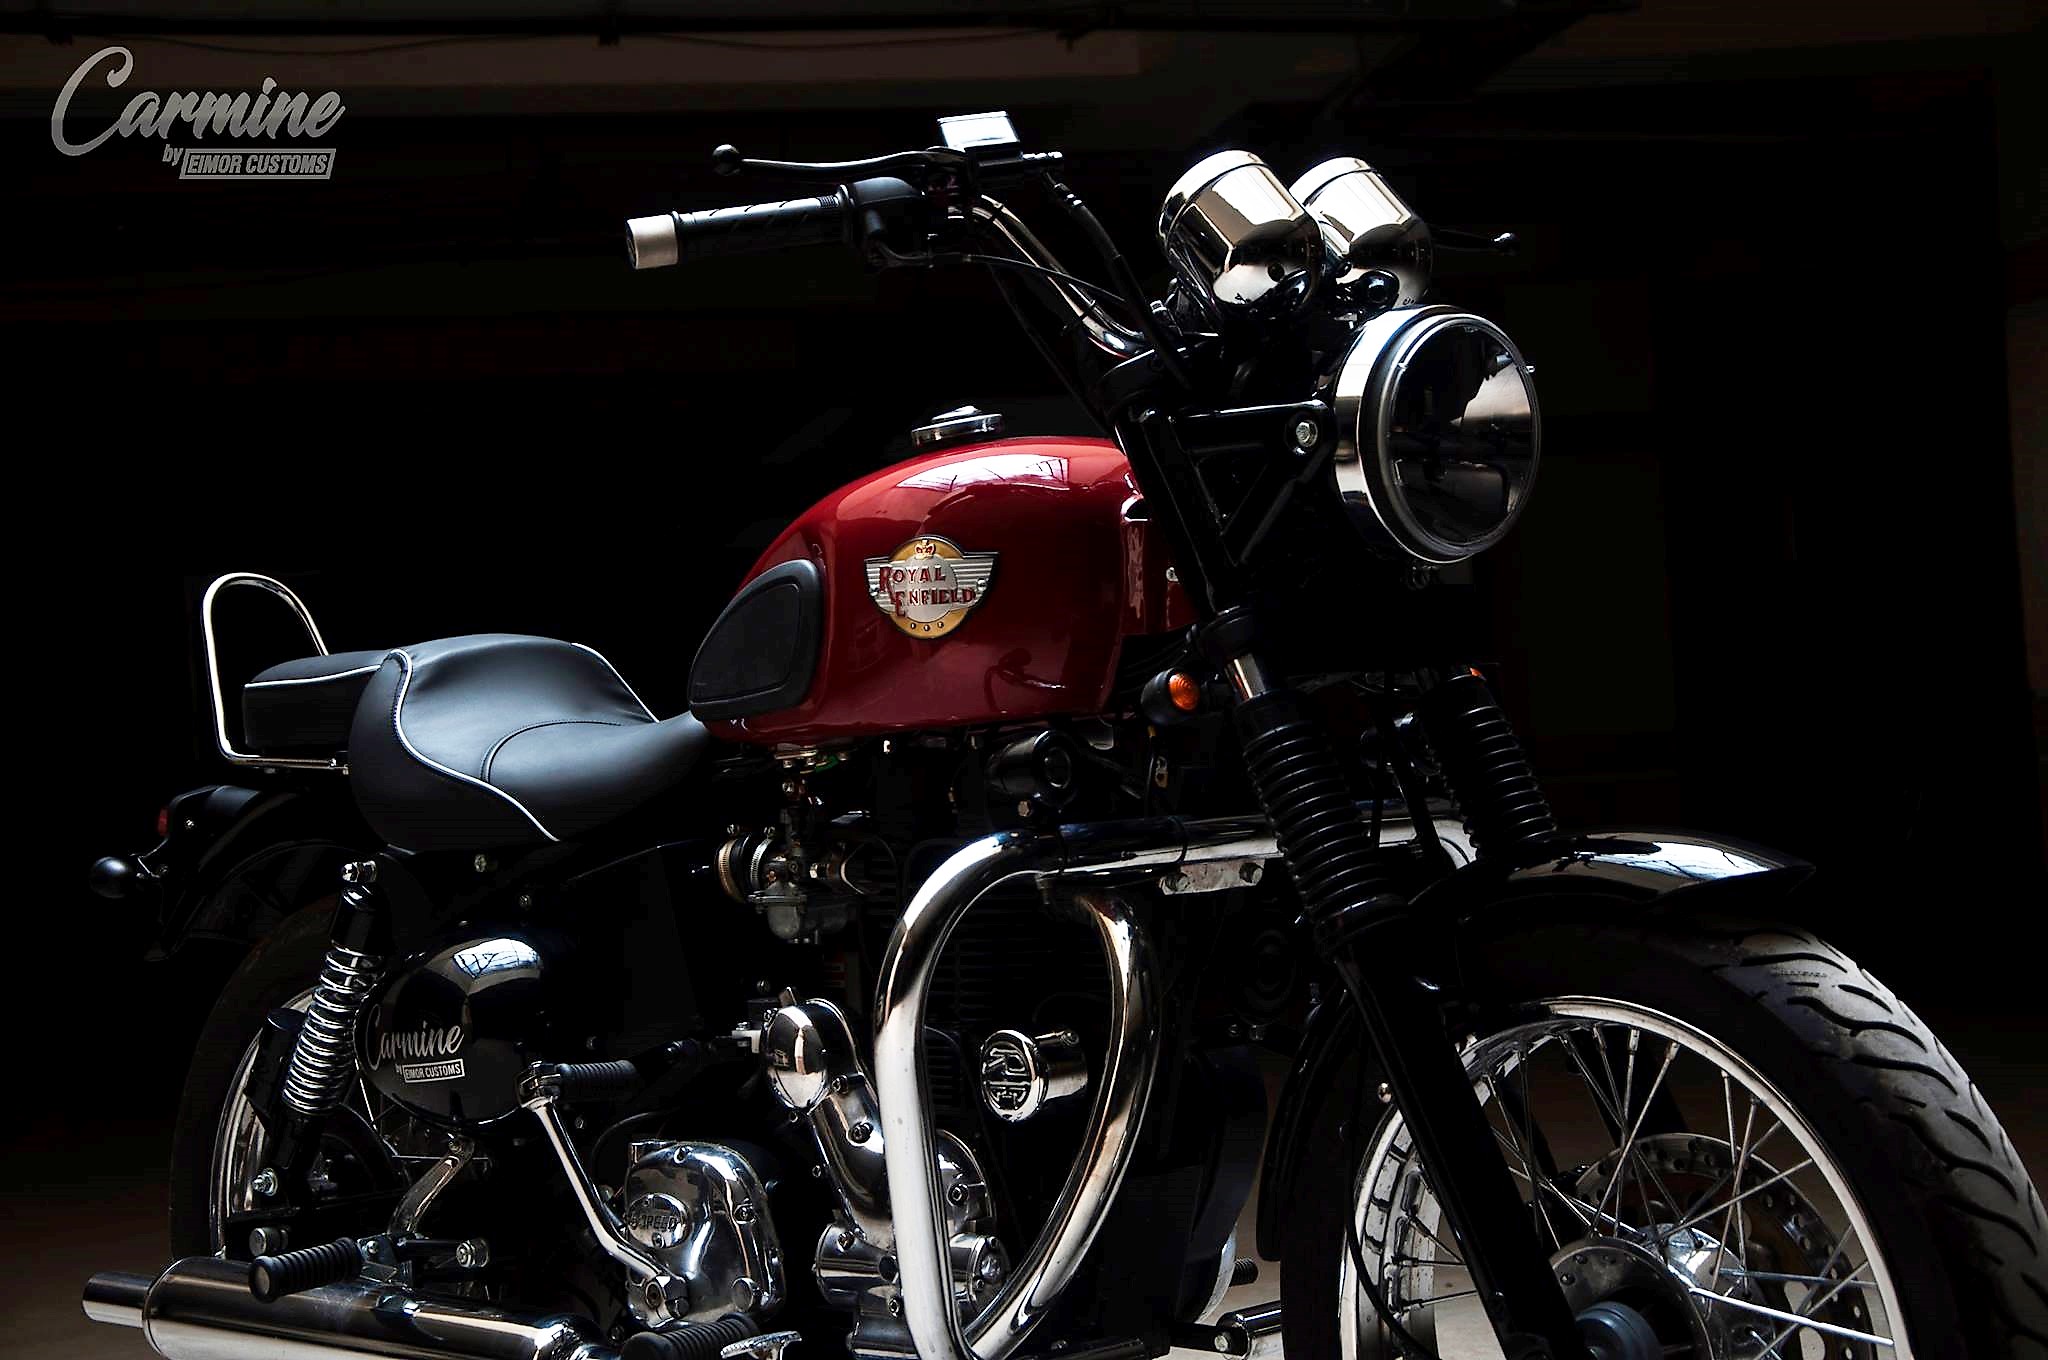 Meet Royal Enfield Carmine 350 Equipped with Premium Parts - macro